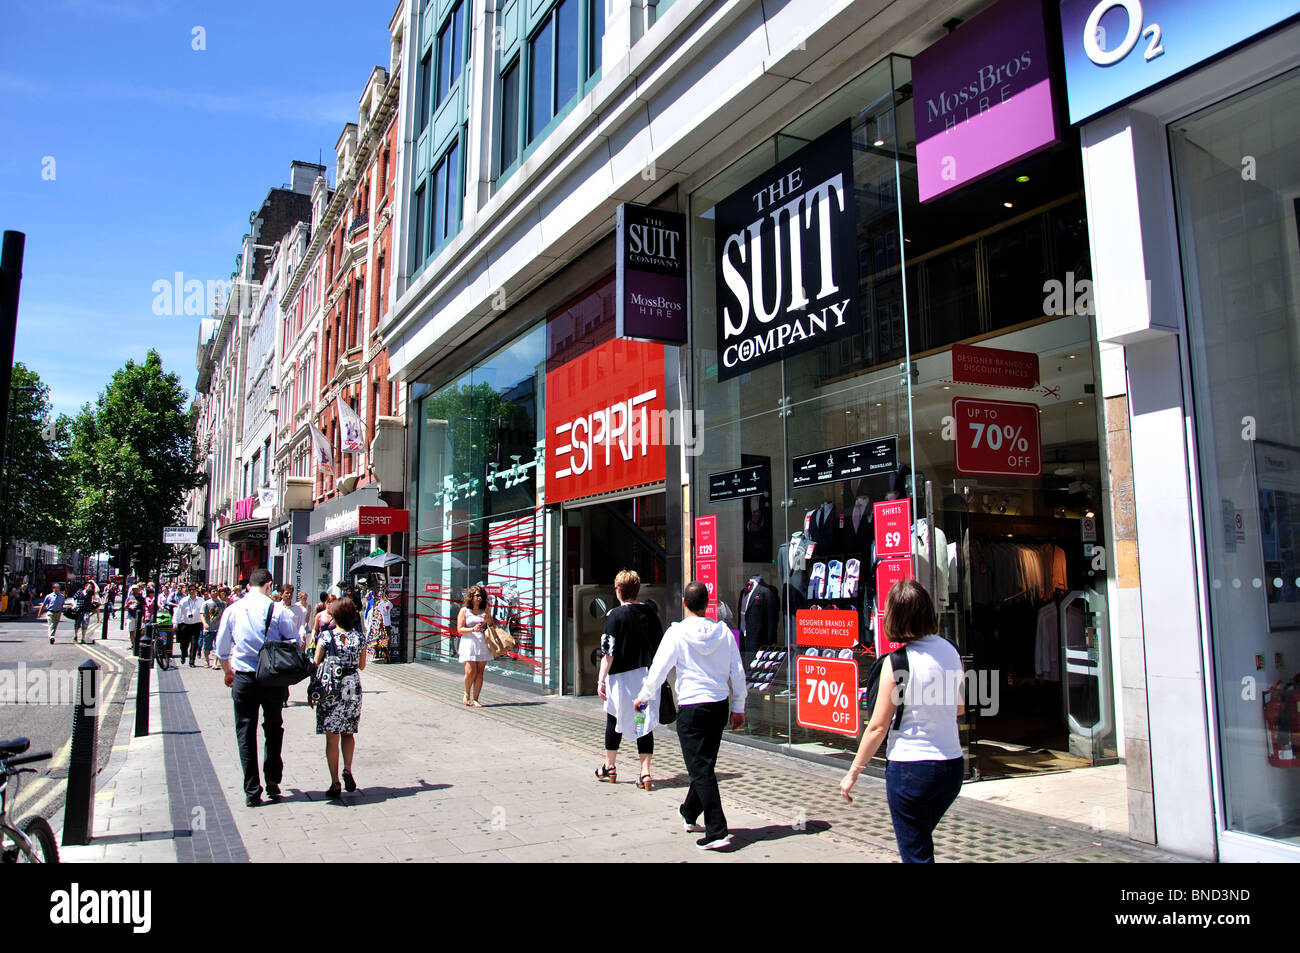 Shoppers in Oxford Street, City of Westminster, London, England, United Kingdom Stock Photo